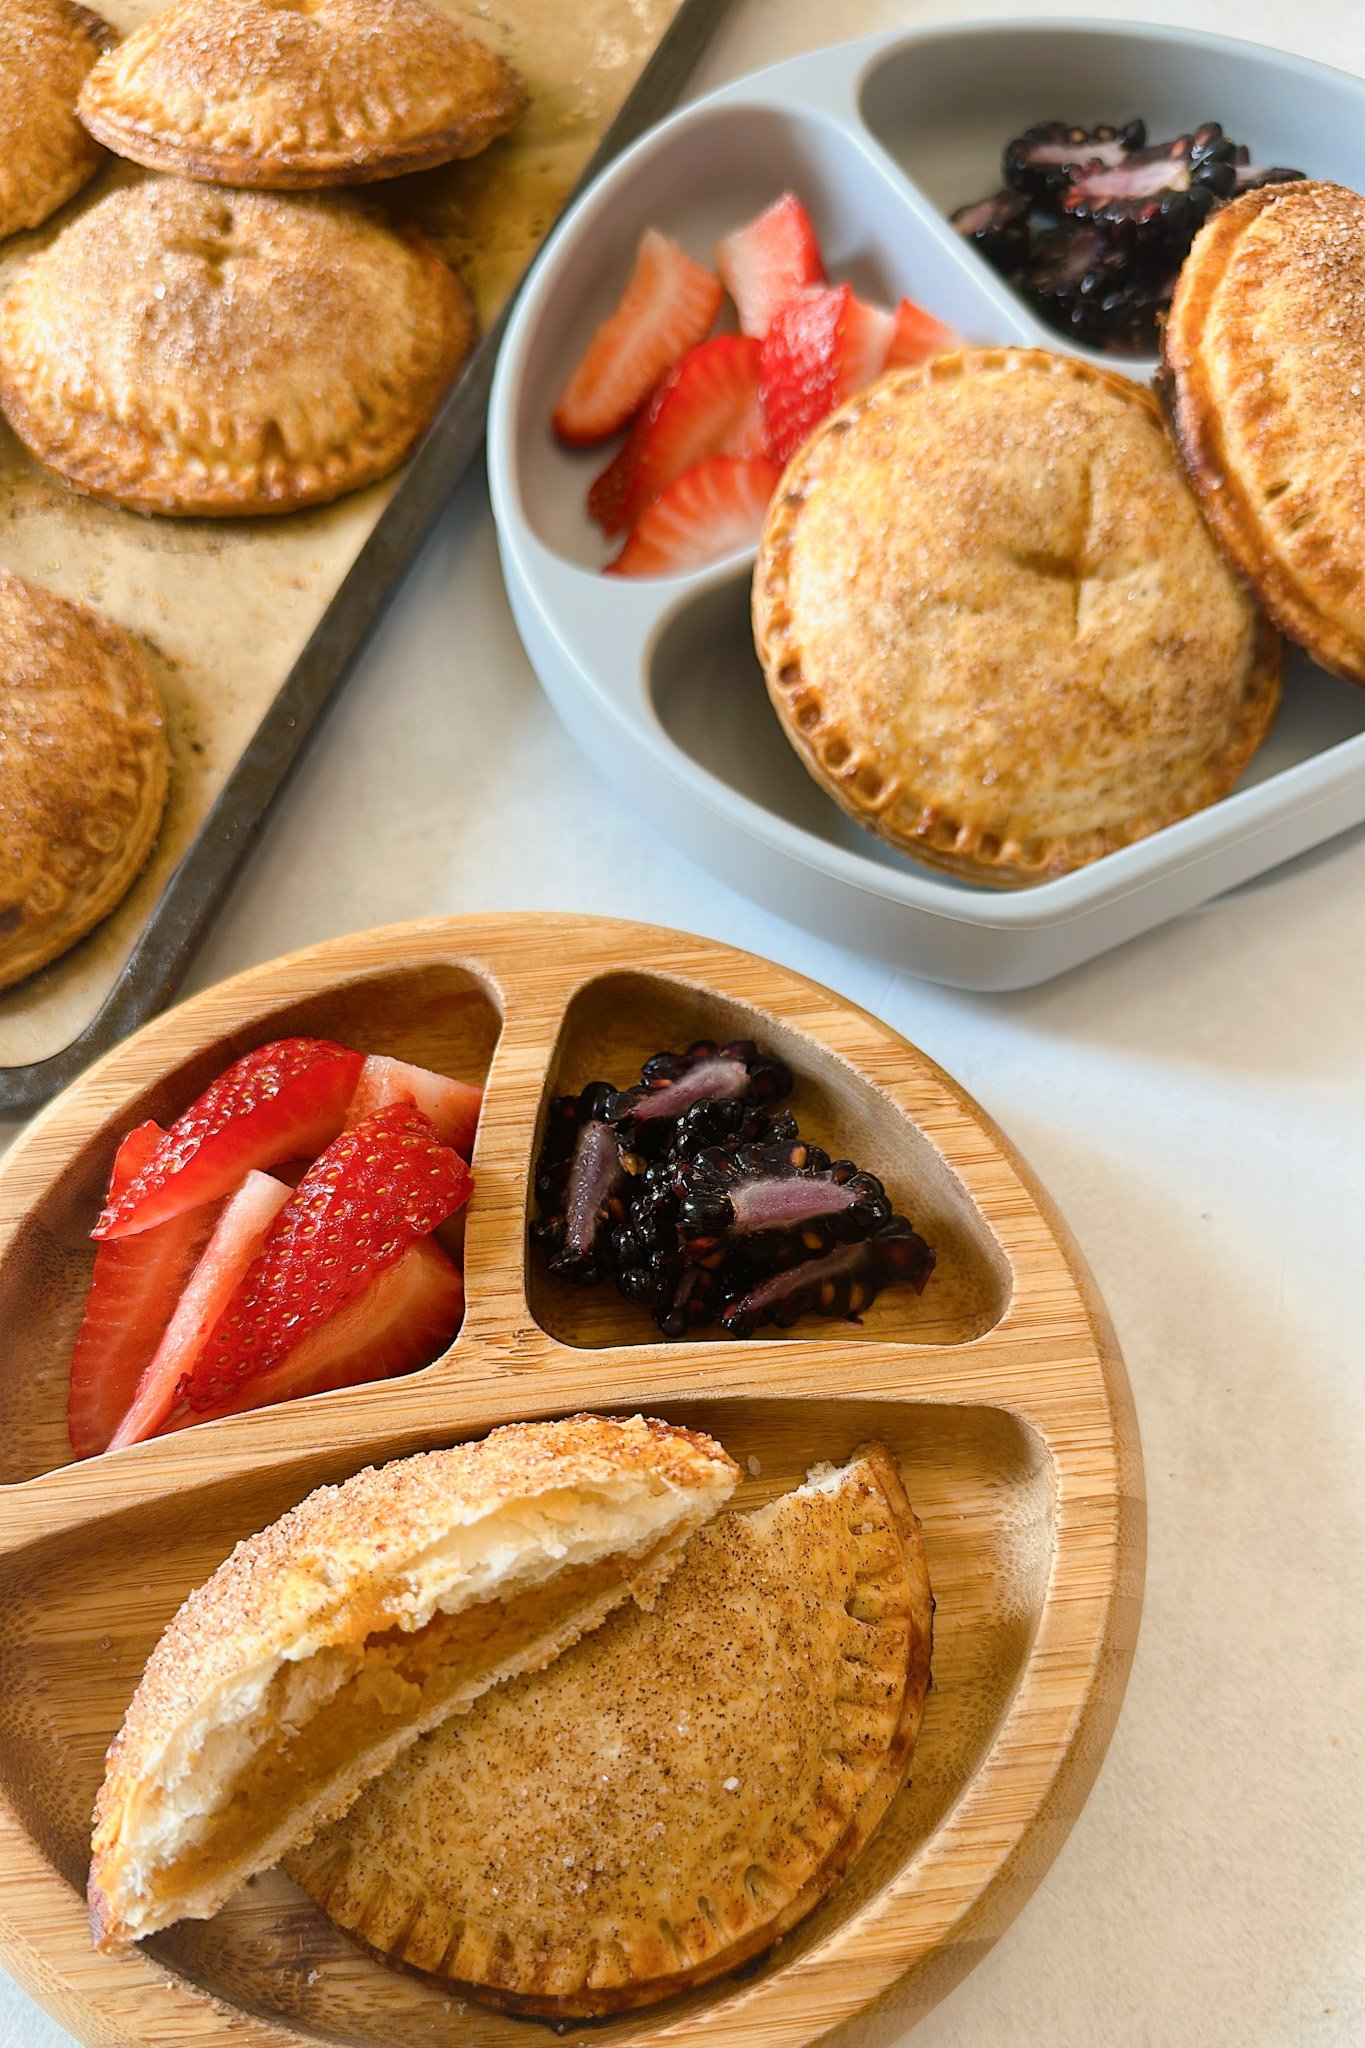 Sweet potato hand pies served with strawberries and blackberries.